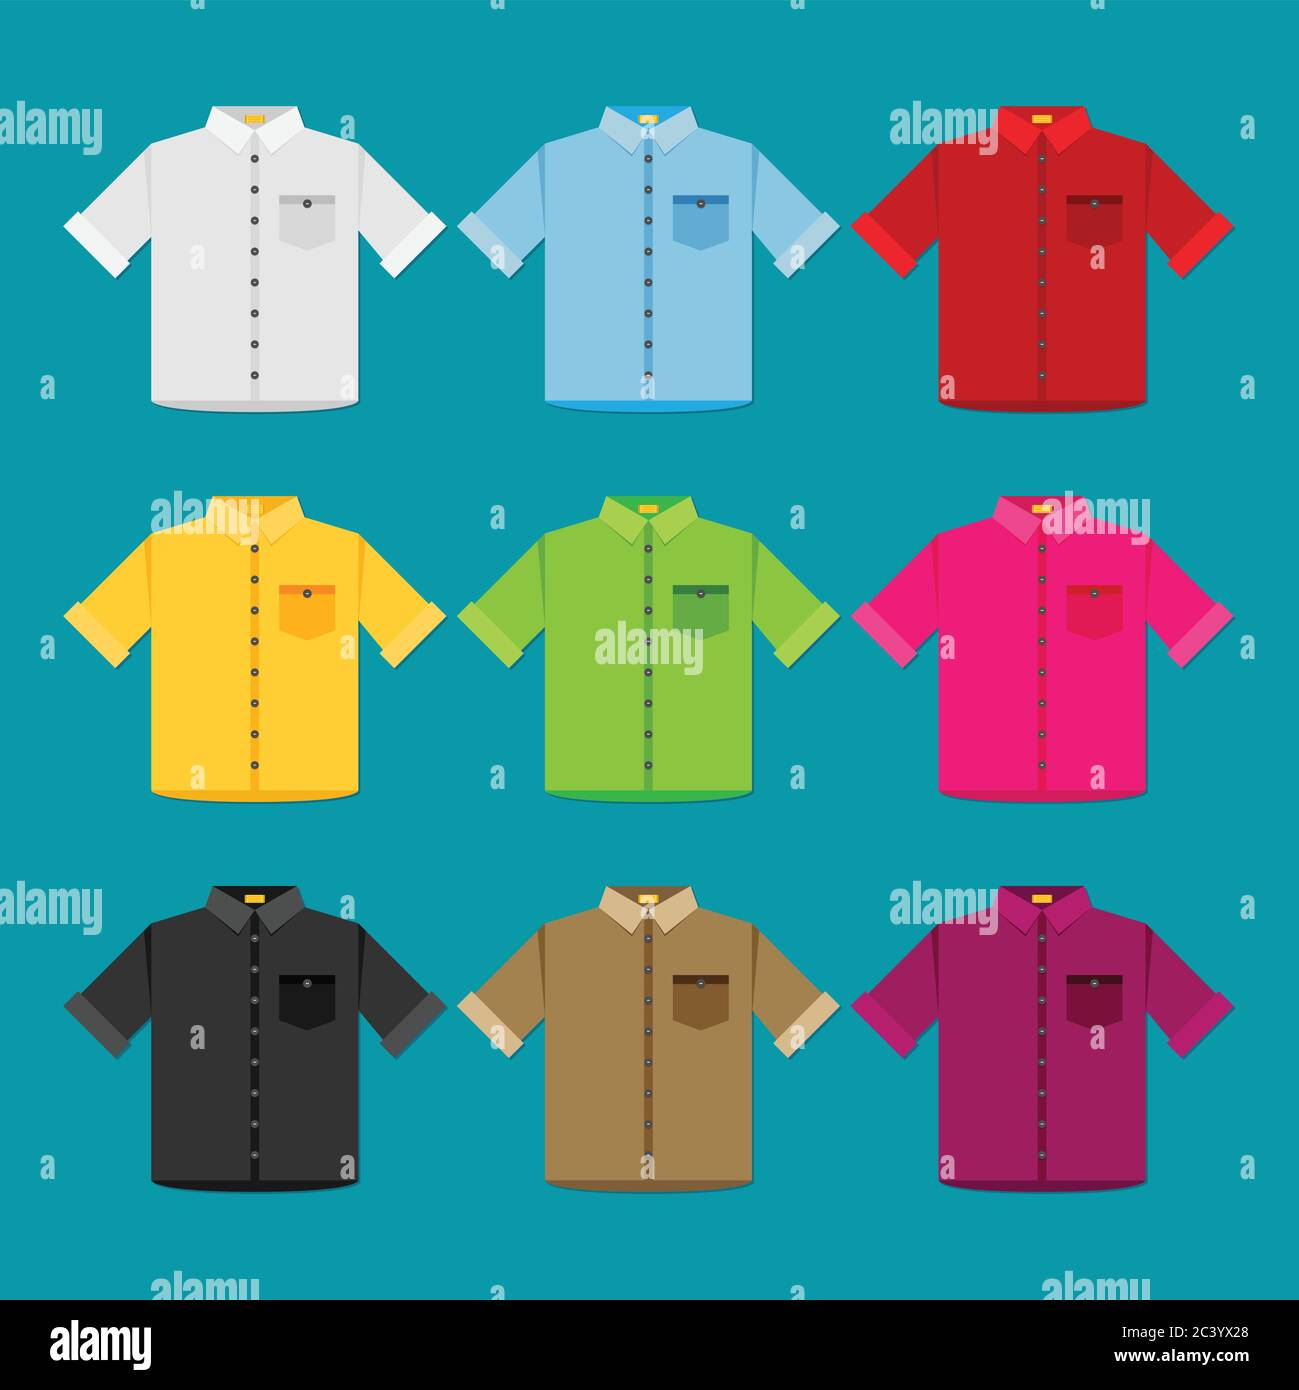 Shirts colored templates for your design in flat style. Stock Vector